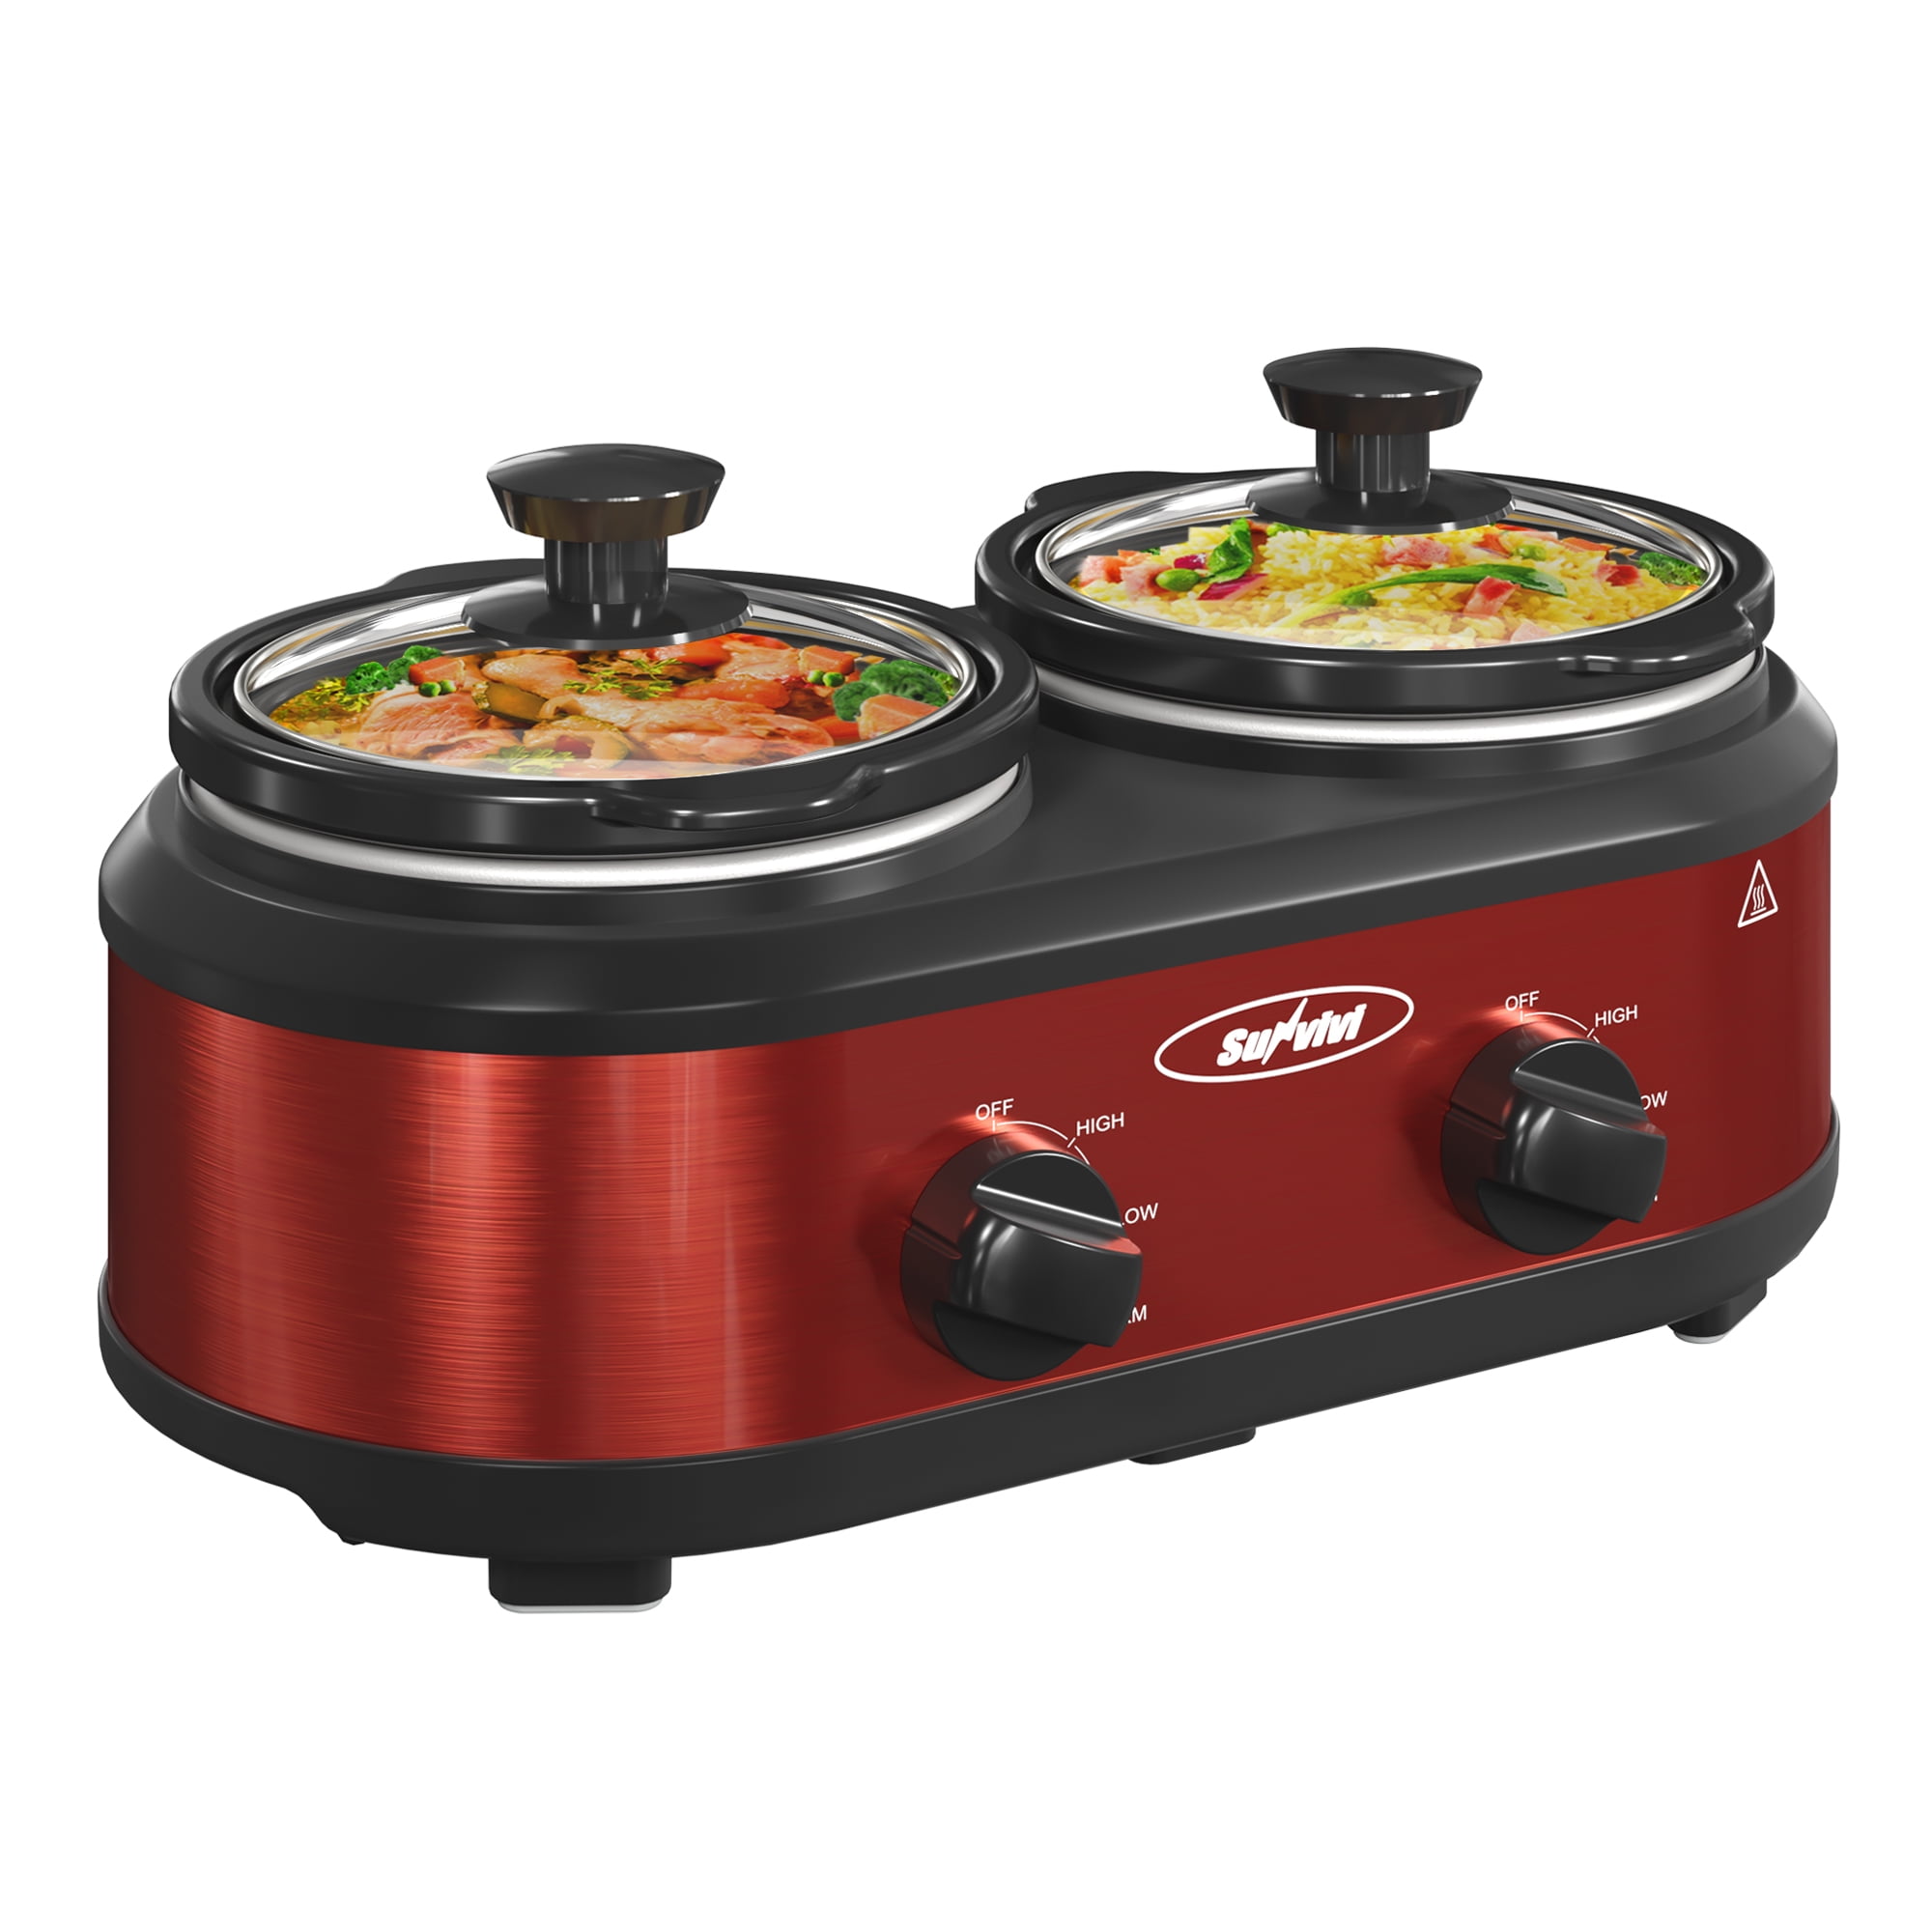 Small Double Slow Cooker, 2 Pot 1.25 Quart Oval Crock Food Warmer